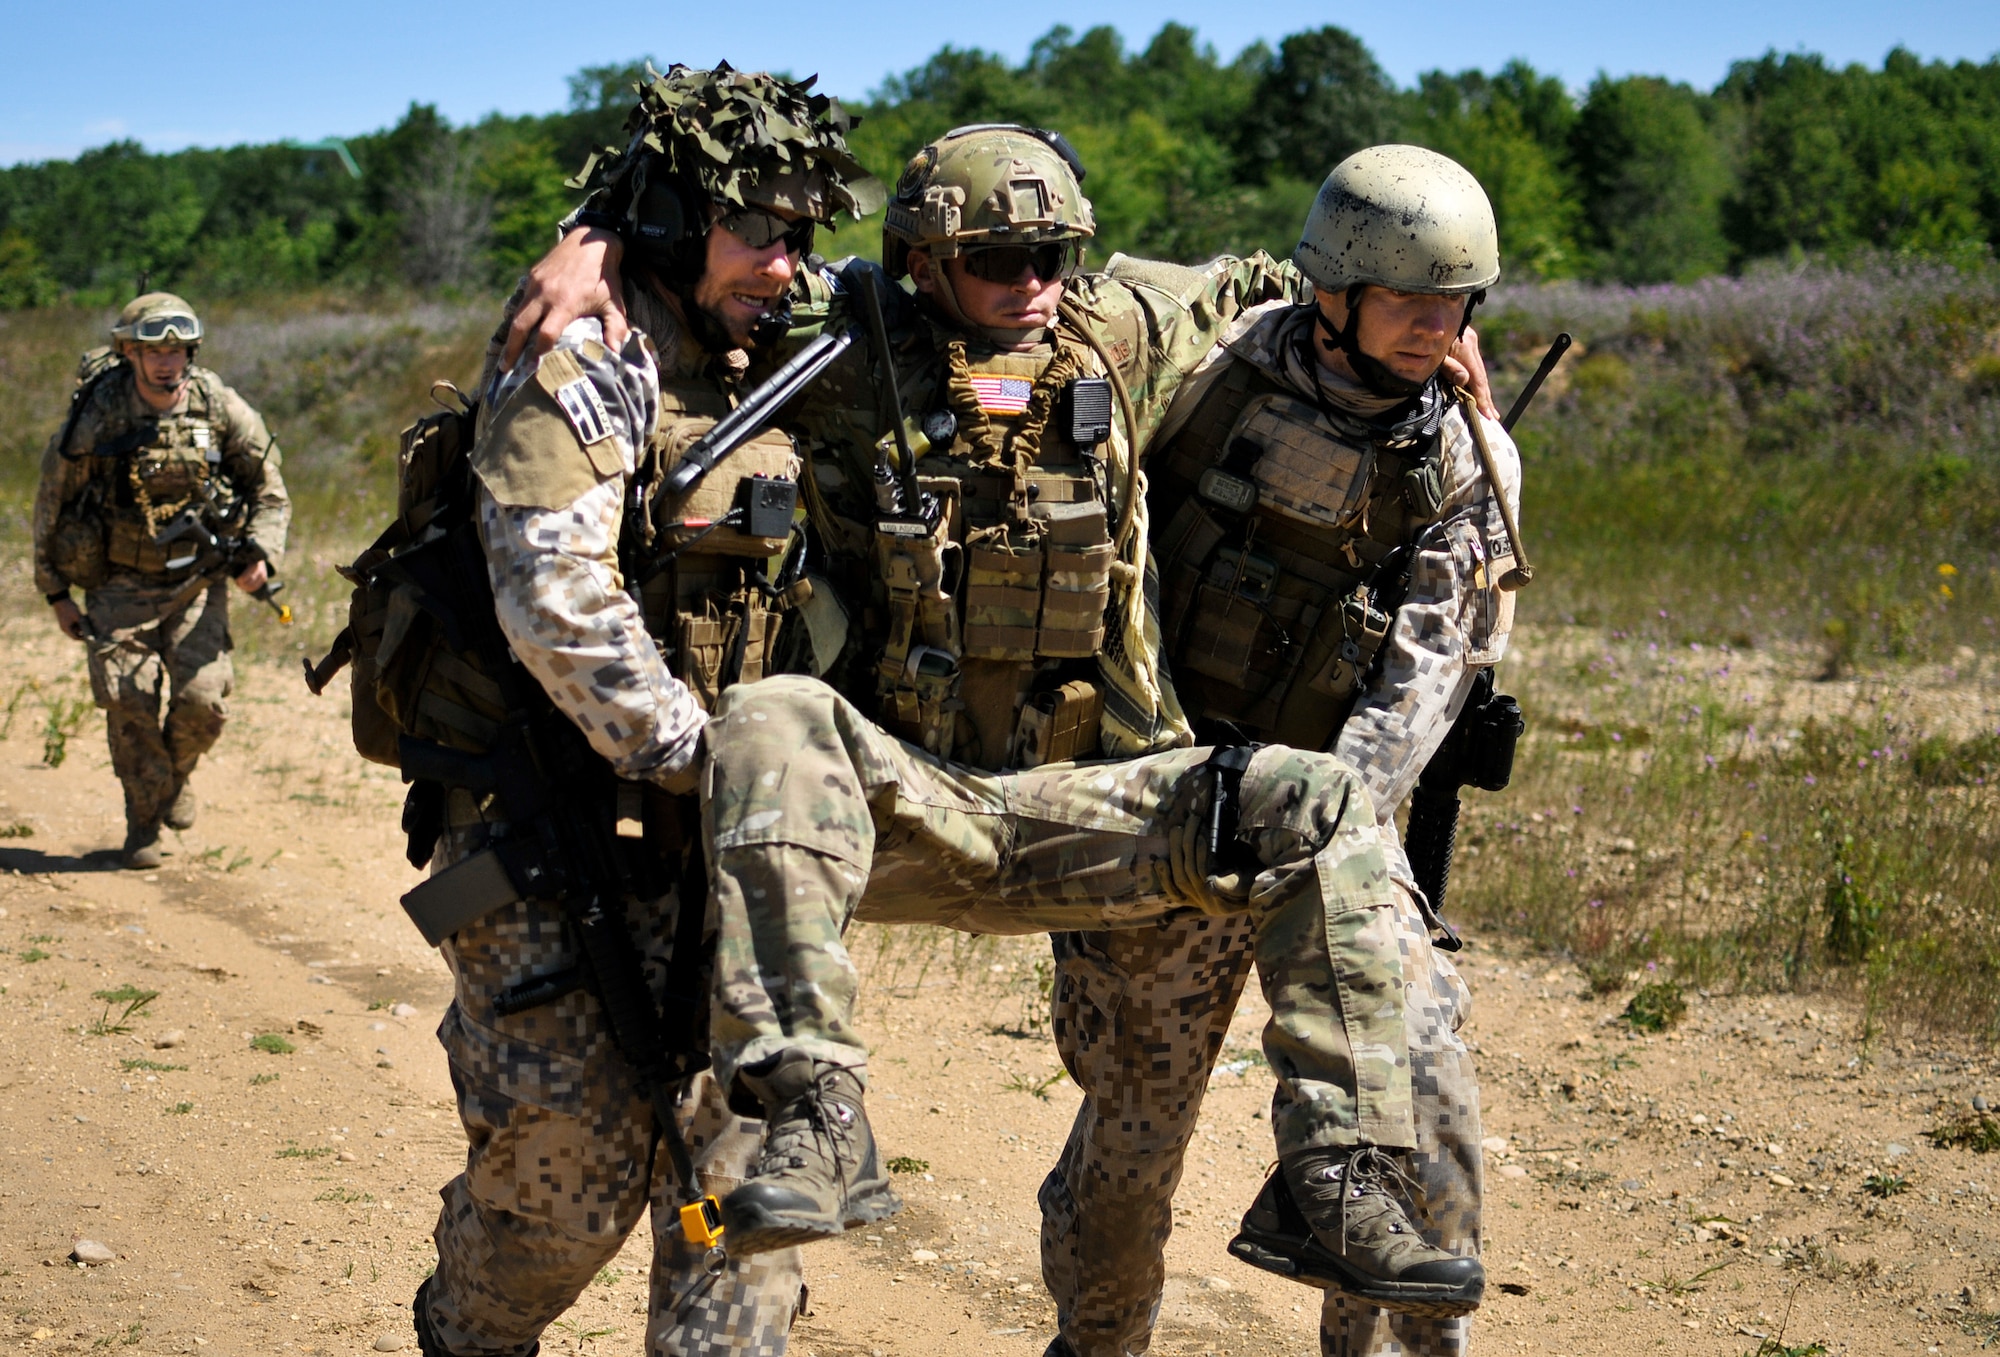 Latvian Capt. Armands Rutkis (left) and Cpl. Janis Gabranis (right), both tactical air control party specialists with the Latvian National Armed Forces, carry Senior Airman Lance A. Liggett to a medical evacuation point after a simulated roadside bomb explosion at Operation Northern Strike in Grayling Air Gunnery Range, Grayling, Mich., Aug. 14, 2014. Northern Strike was a 3-week-long exercise led by the (U.S. Air National Guard photo by Staff Sgt. Lealan Buehrer)